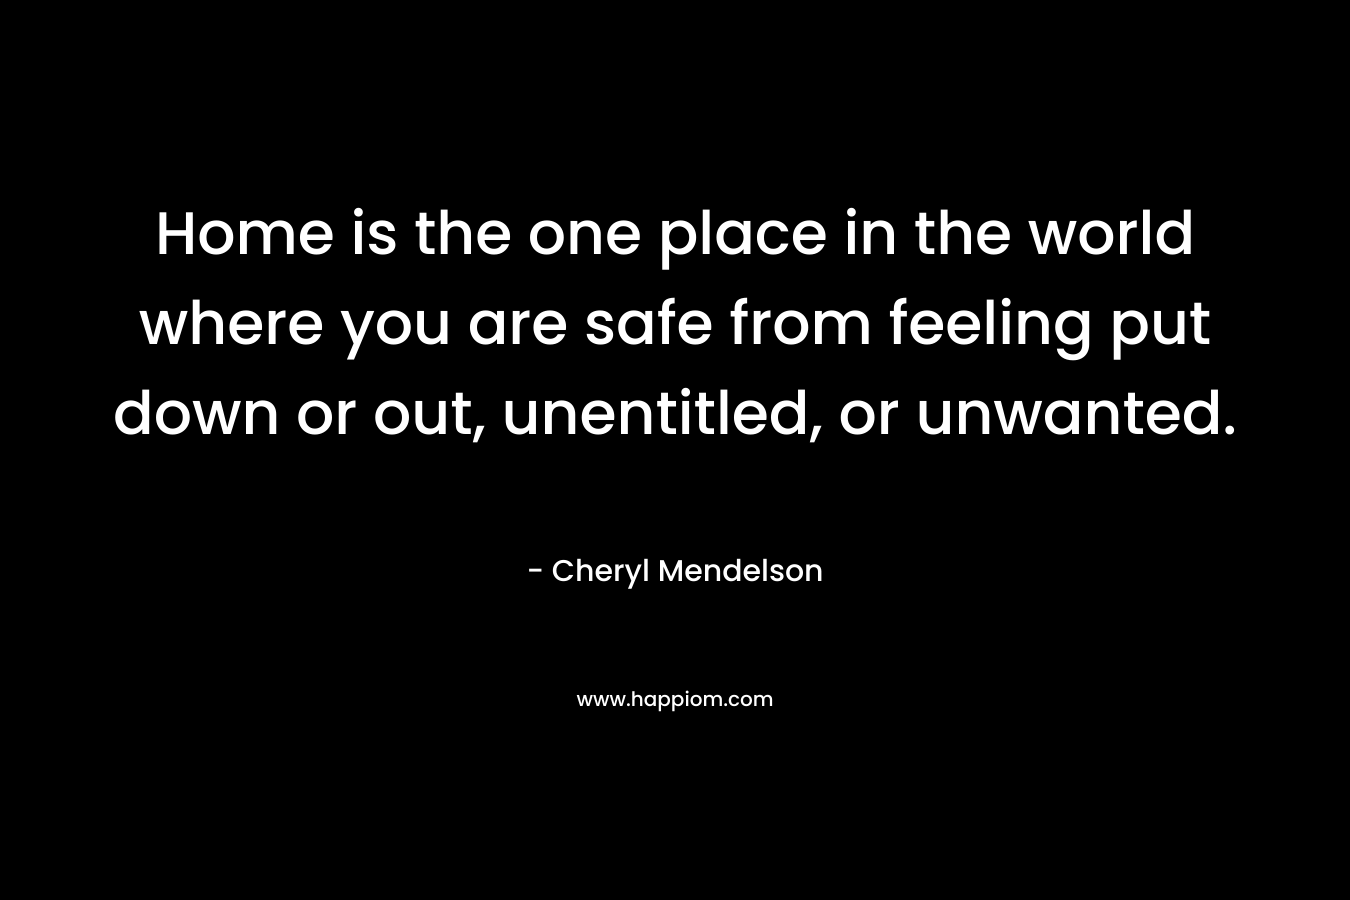 Home is the one place in the world where you are safe from feeling put down or out, unentitled, or unwanted. – Cheryl Mendelson